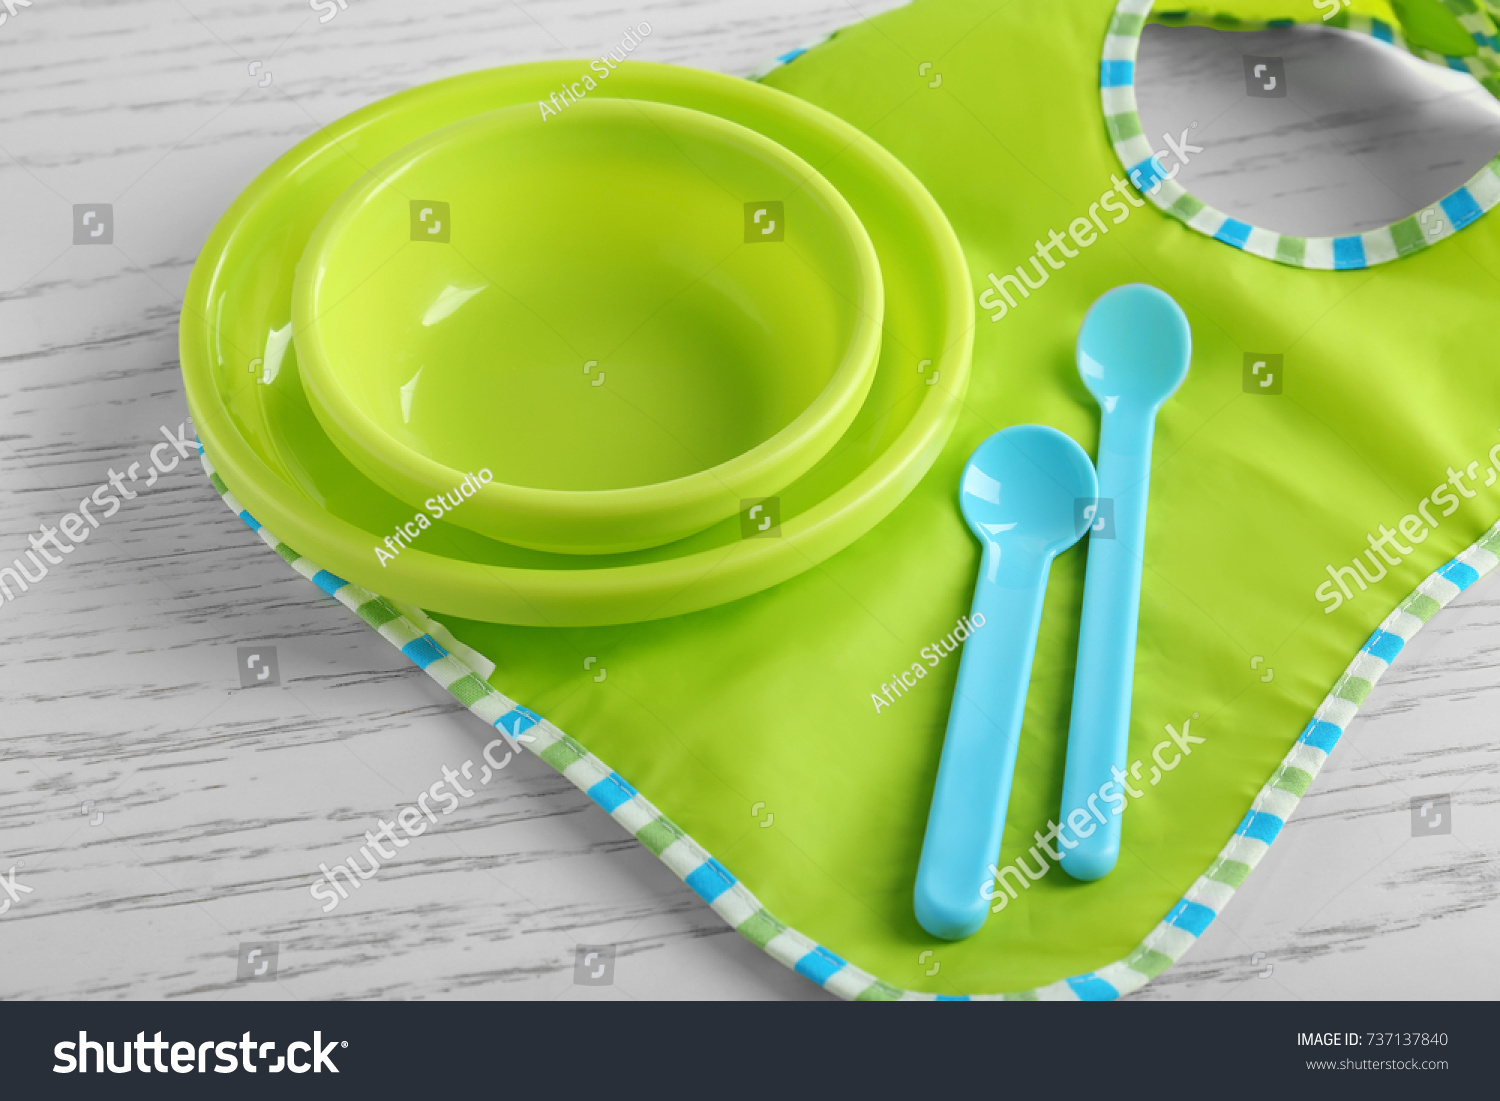 Set with bright baby dishware on table #737137840